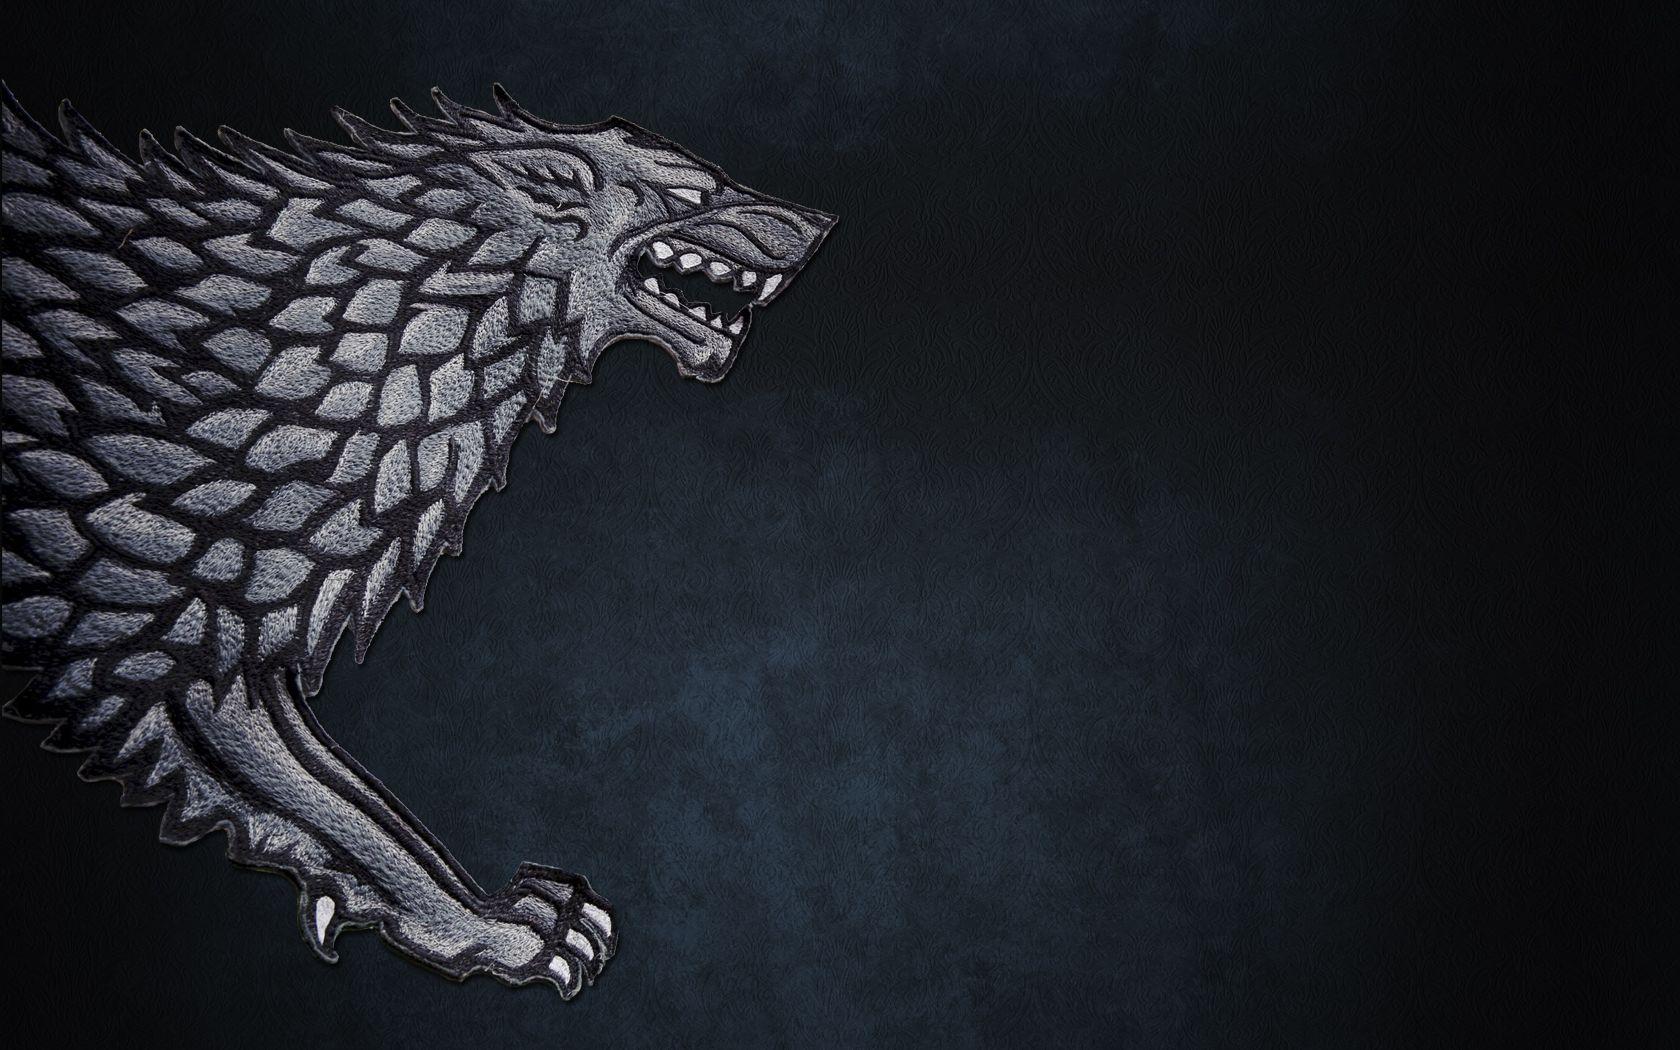 Game of Thrones, A Song Of Ice And Fire, TV Series, direwolf, House